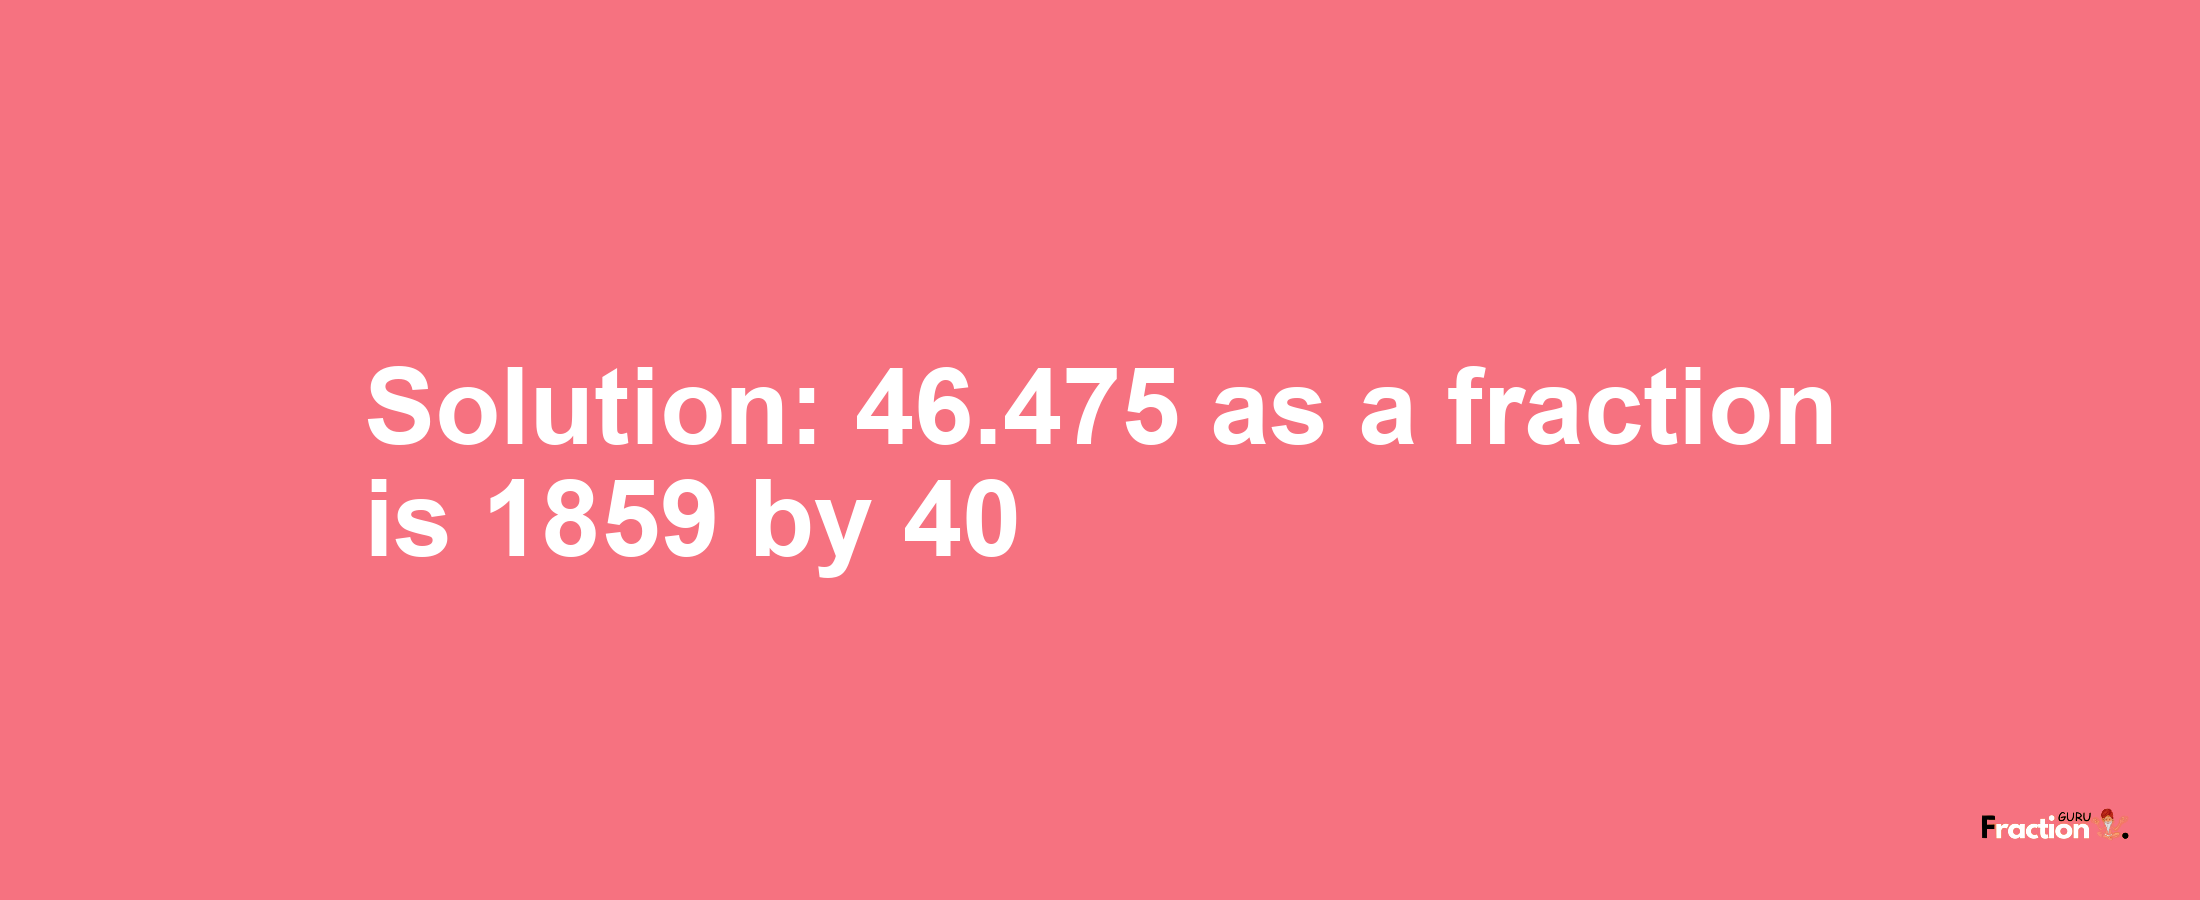 Solution:46.475 as a fraction is 1859/40